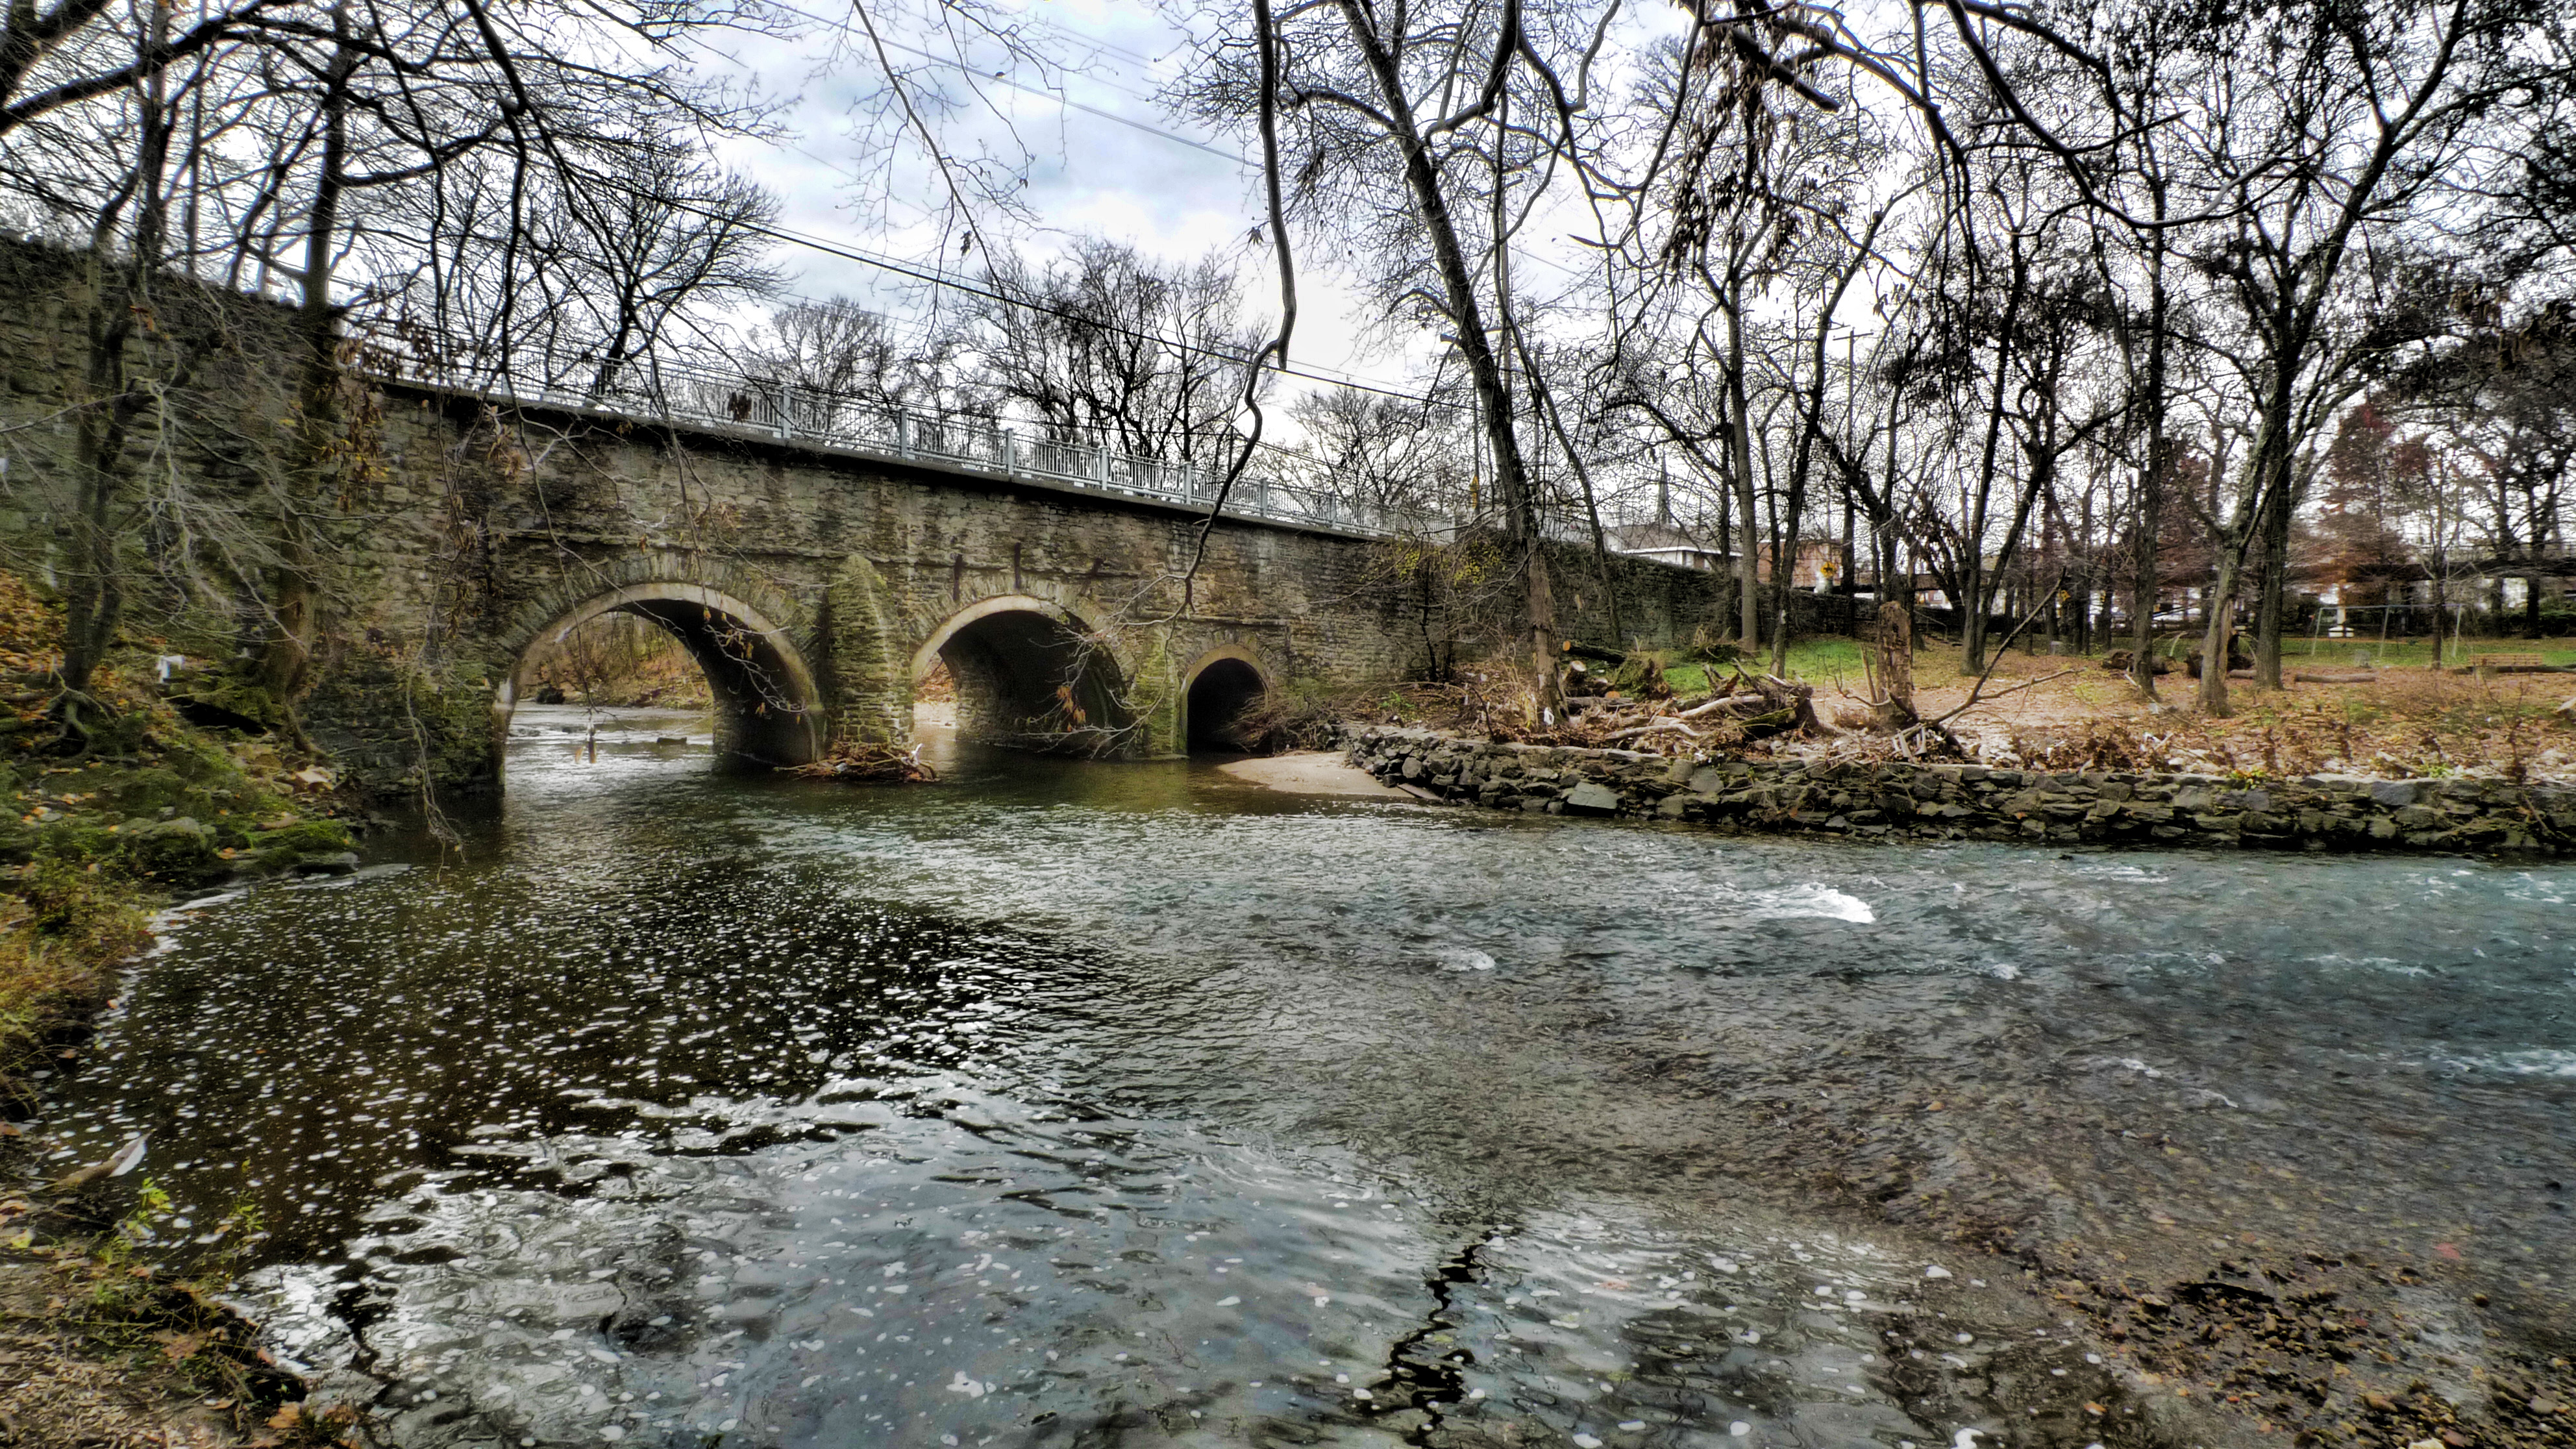 The Pennypack Creek Bridge is more than 300 years old. | courtesy of Fred Moore